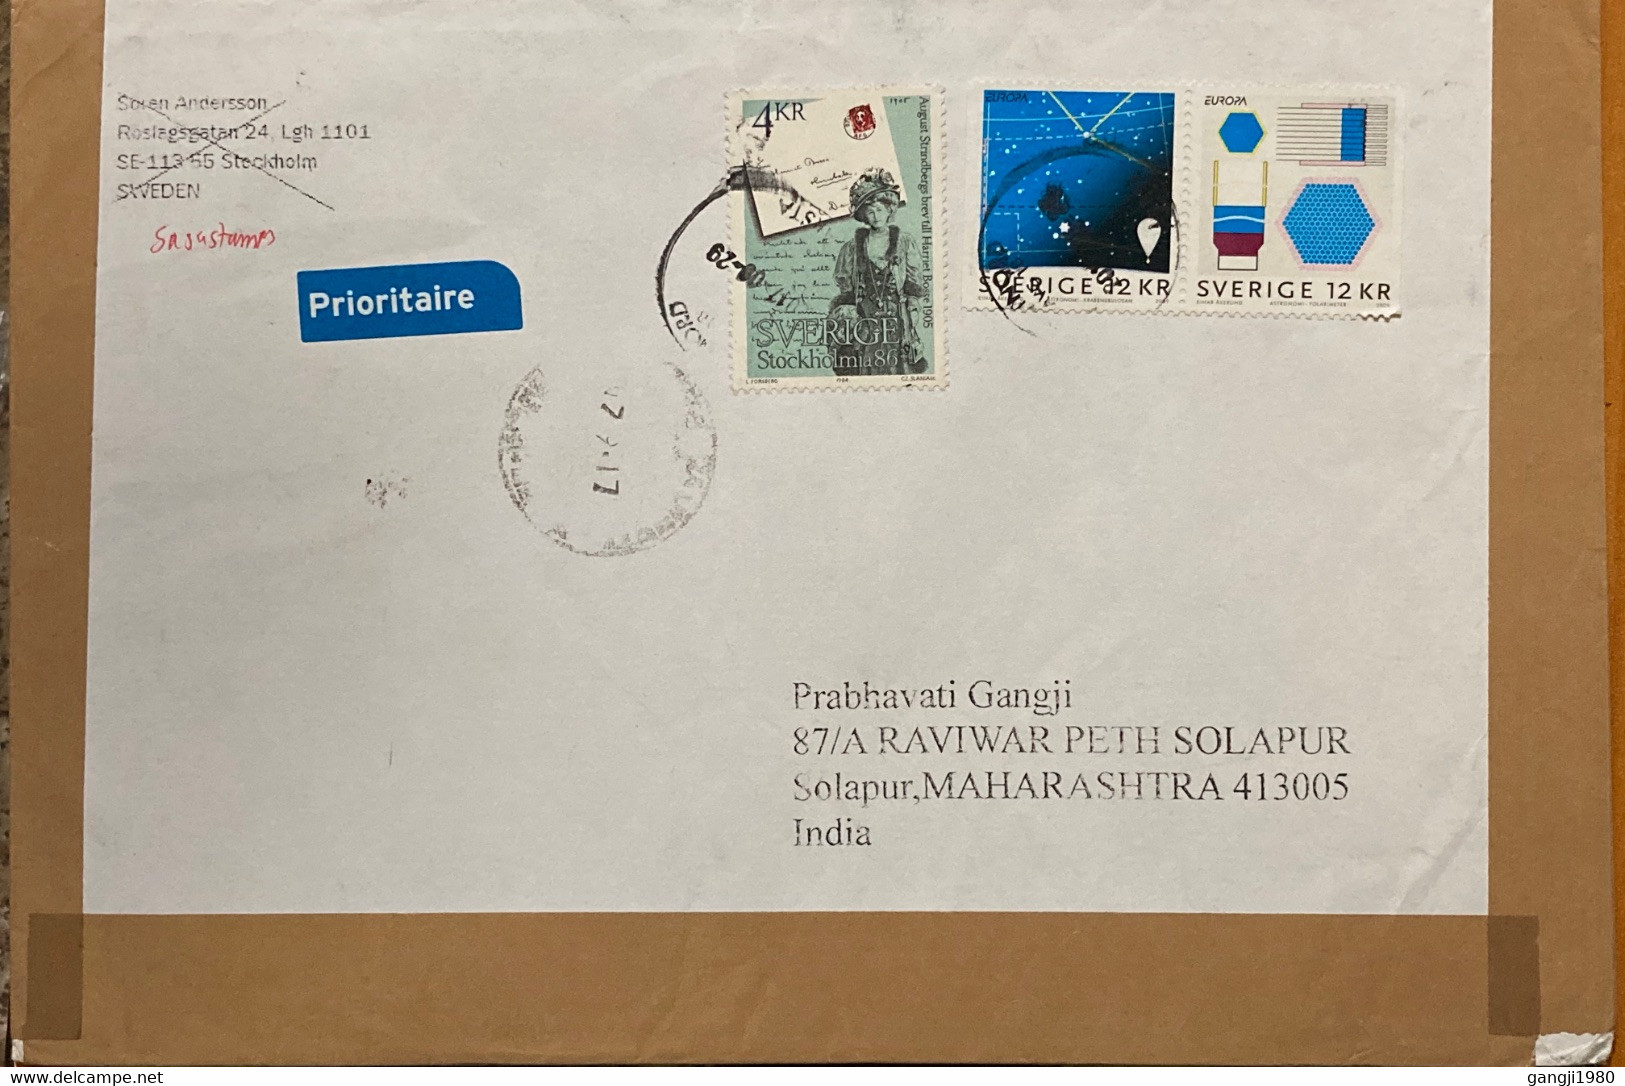 SWEDEN 2009, EUROPA SE-TENENT ,COVER ON STAMP ! STOCKHOLMIA 86 ,3 STAMP USED COVER TO INDIA - Storia Postale